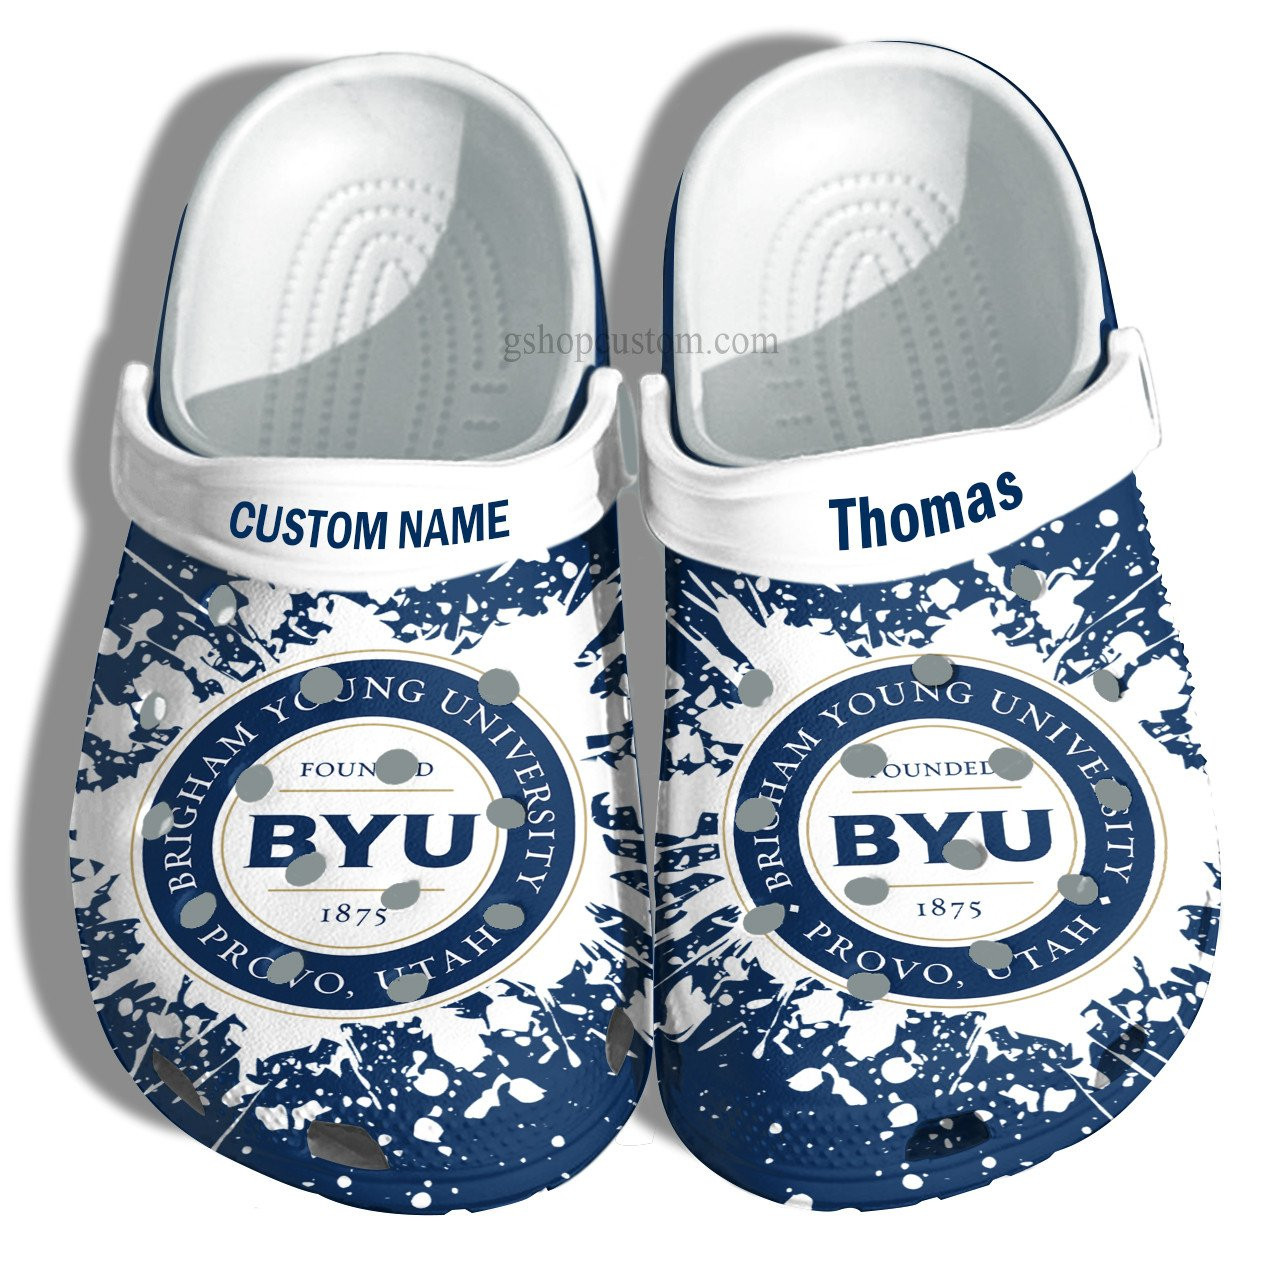 Brigham Young University Graduation Gifts Croc Shoes Customize- Admission Gift Crocs Shoes